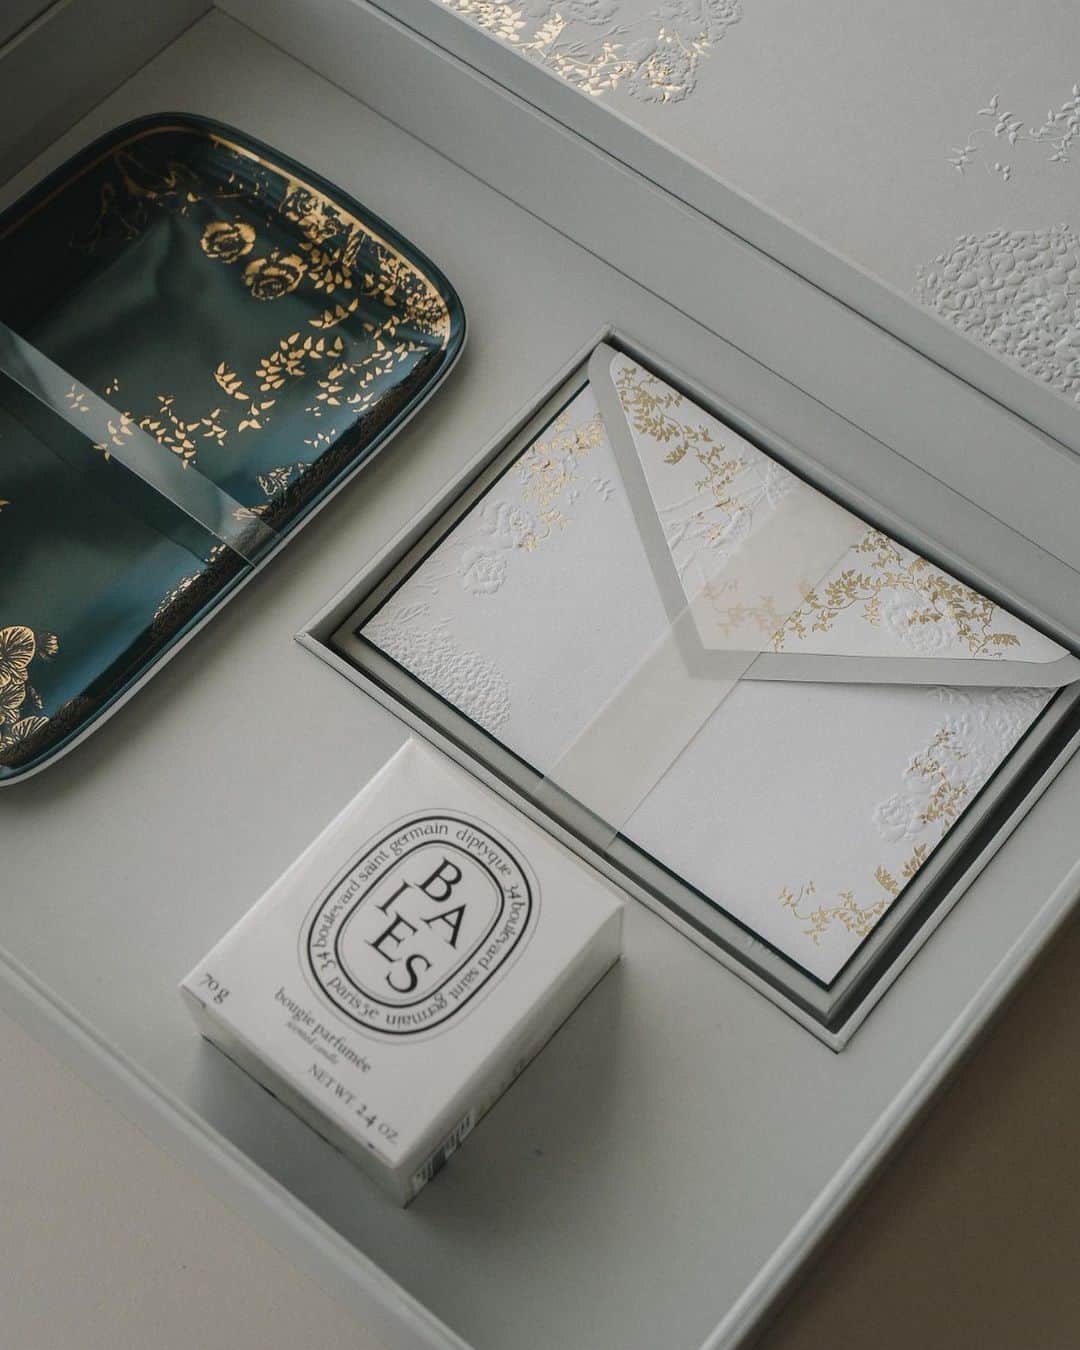 Veronica Halimのインスタグラム：「An invitation that comes in a box with a custom-designed trinket tray and starionery definitely sets the tone of the event and makes the recipients feel extra special.  For MJ &T —  #ldvh  #カリグラフィースタイリング  #weddinginvitation #weddingstationery  #embossed  #paperlovers #ウェディング #ウェディングアイテム #カリグラファ #veronicahalim #スタイリング #prettypapers #weddingsuite #truffypi #gifting #homegoods #packagingdesign #diptyque」